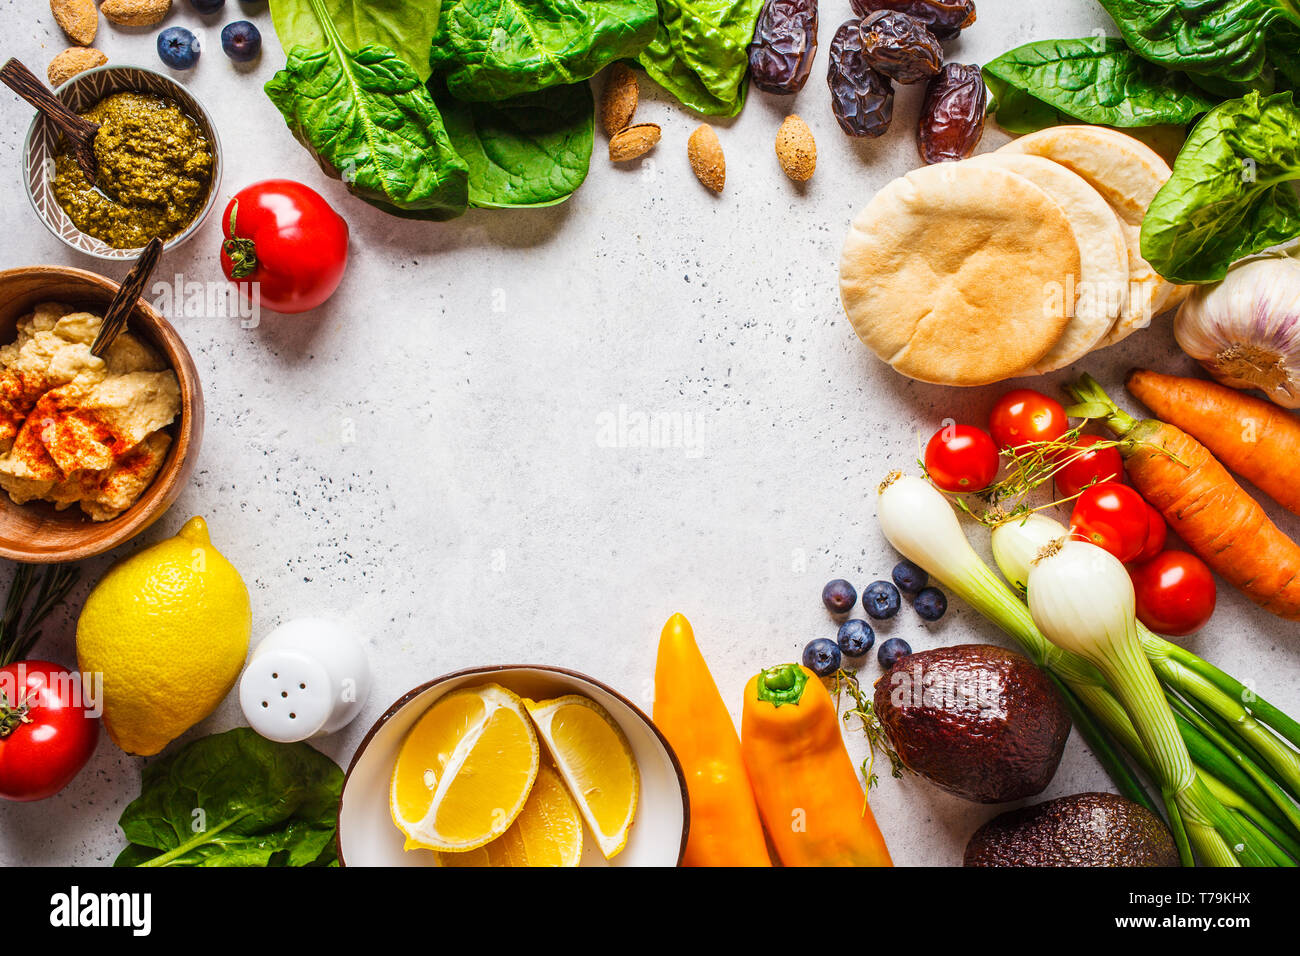 Healthy vegetarian food background. Vegetables, hummus, pesto and fruits. Stock Photo